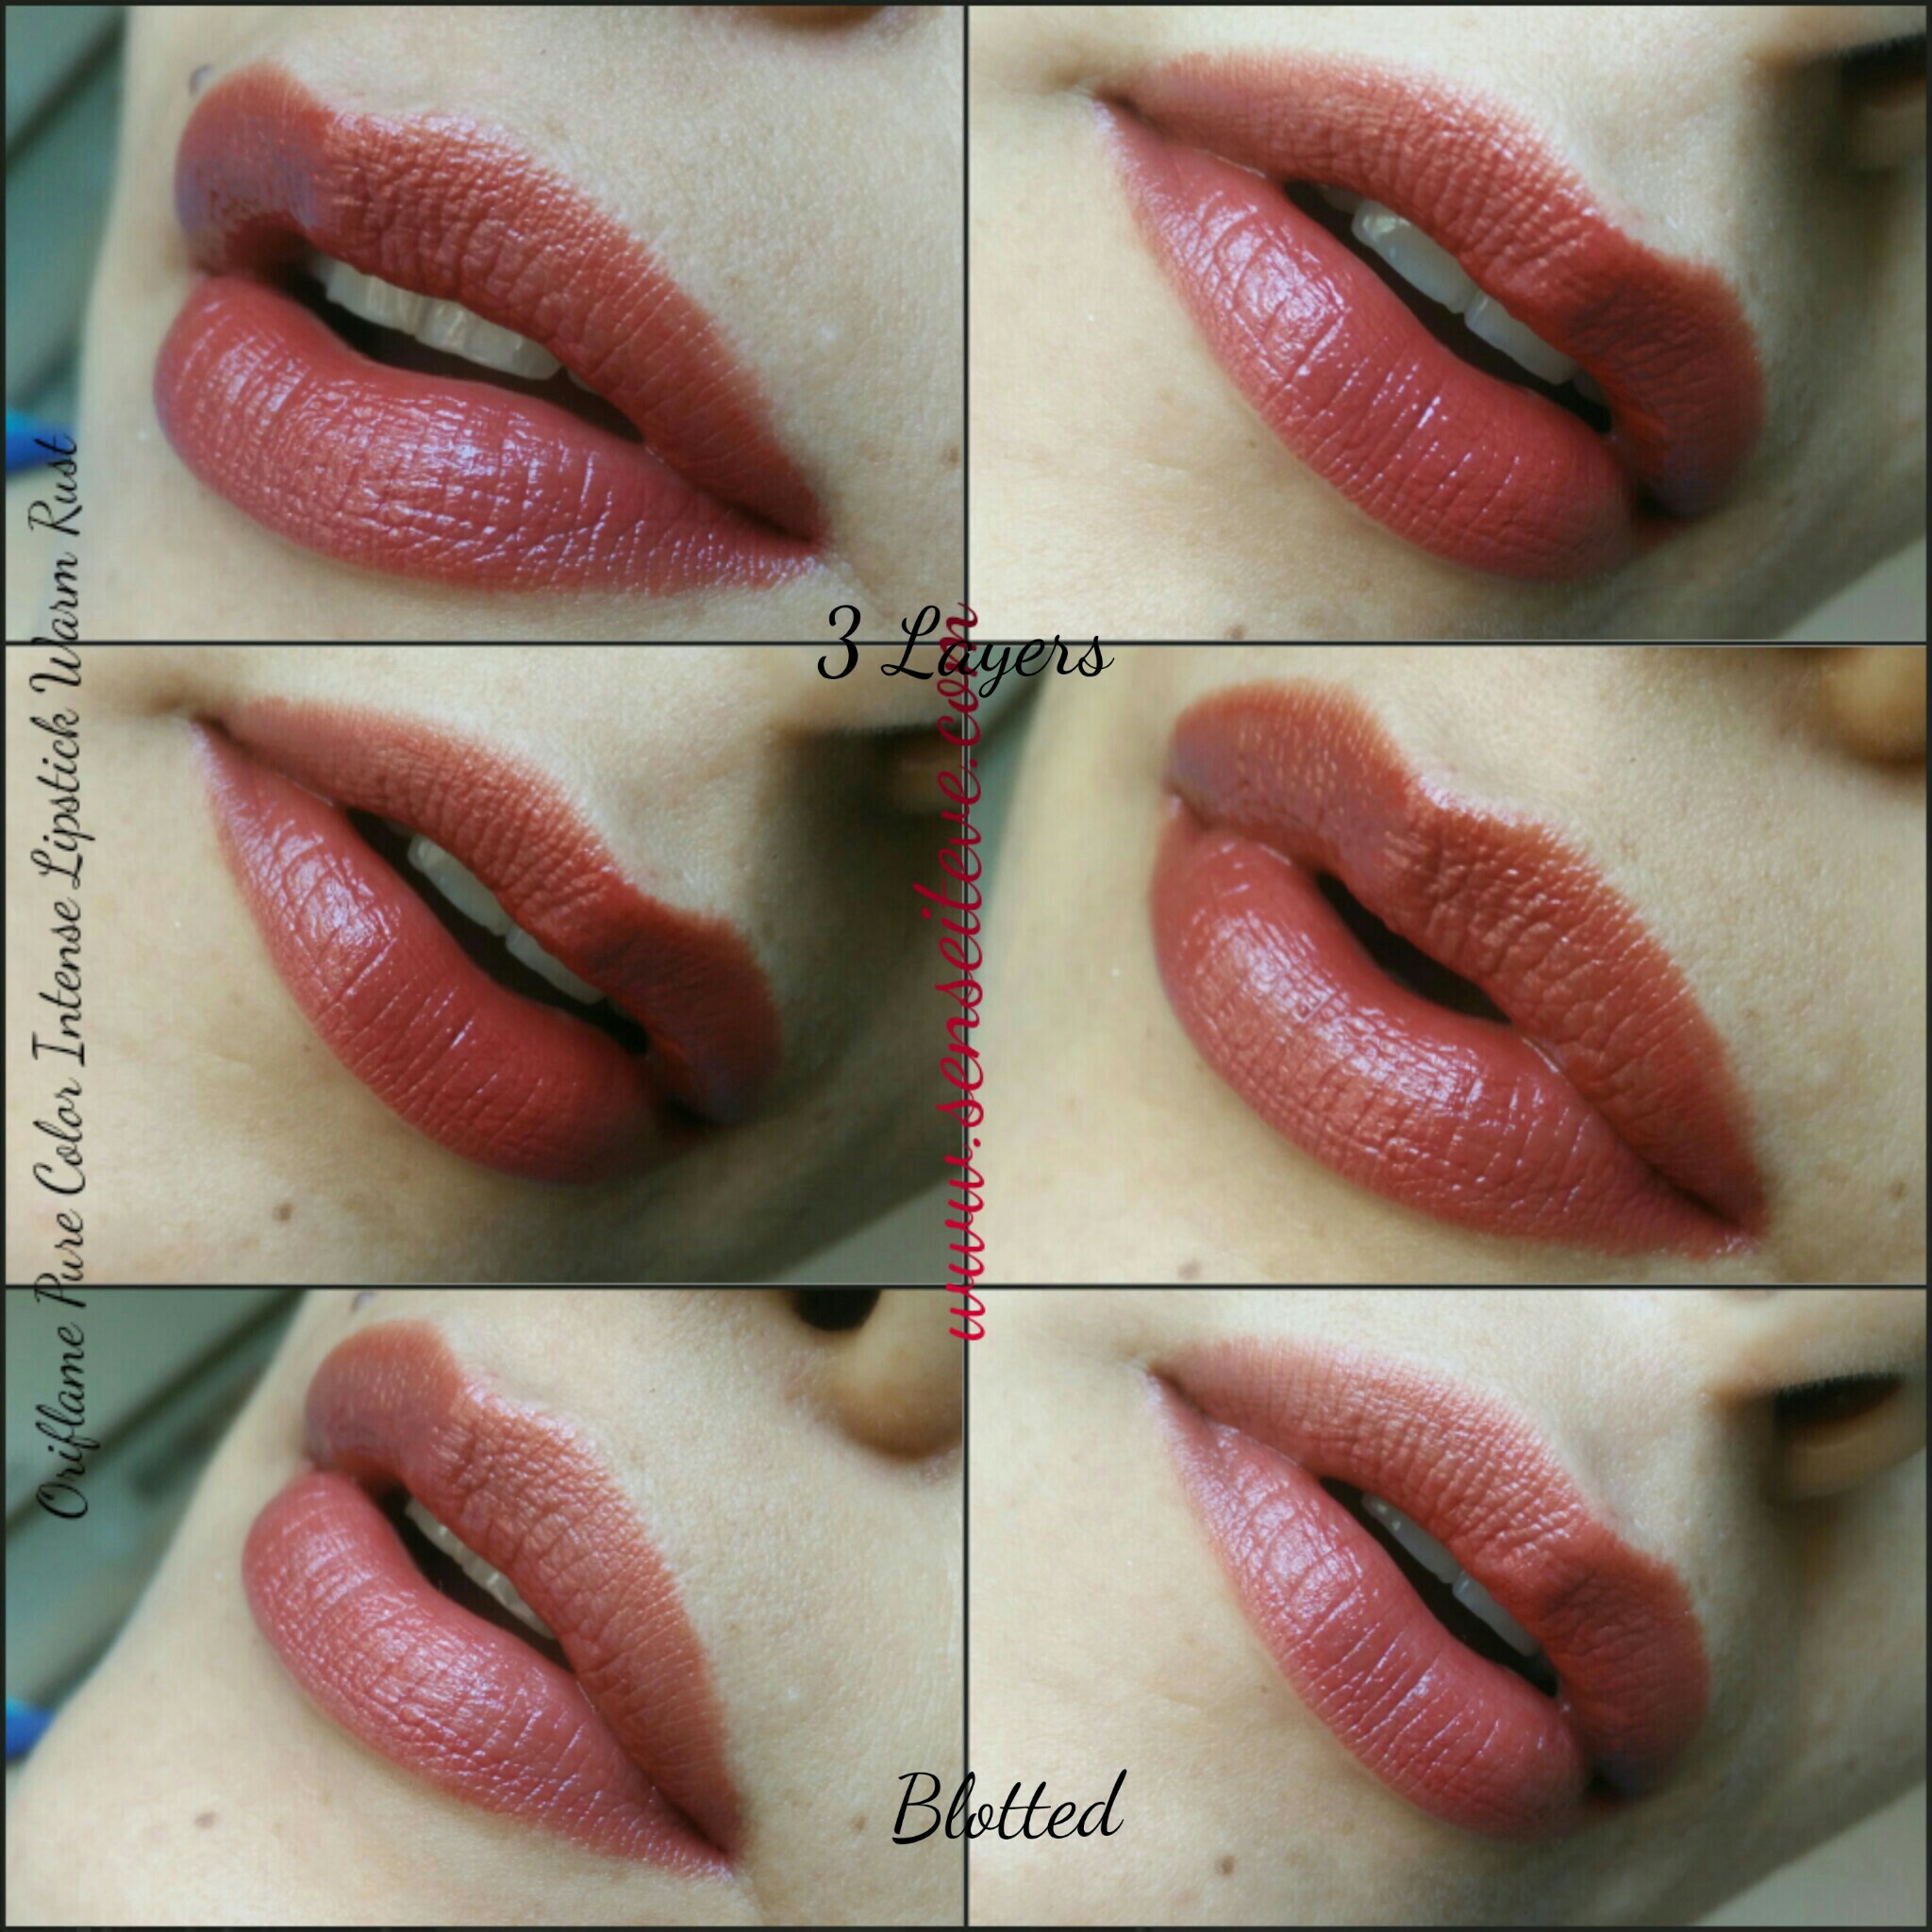 Oriflame Pure Color Intense Lipstick Warm Rust Swatches 26659